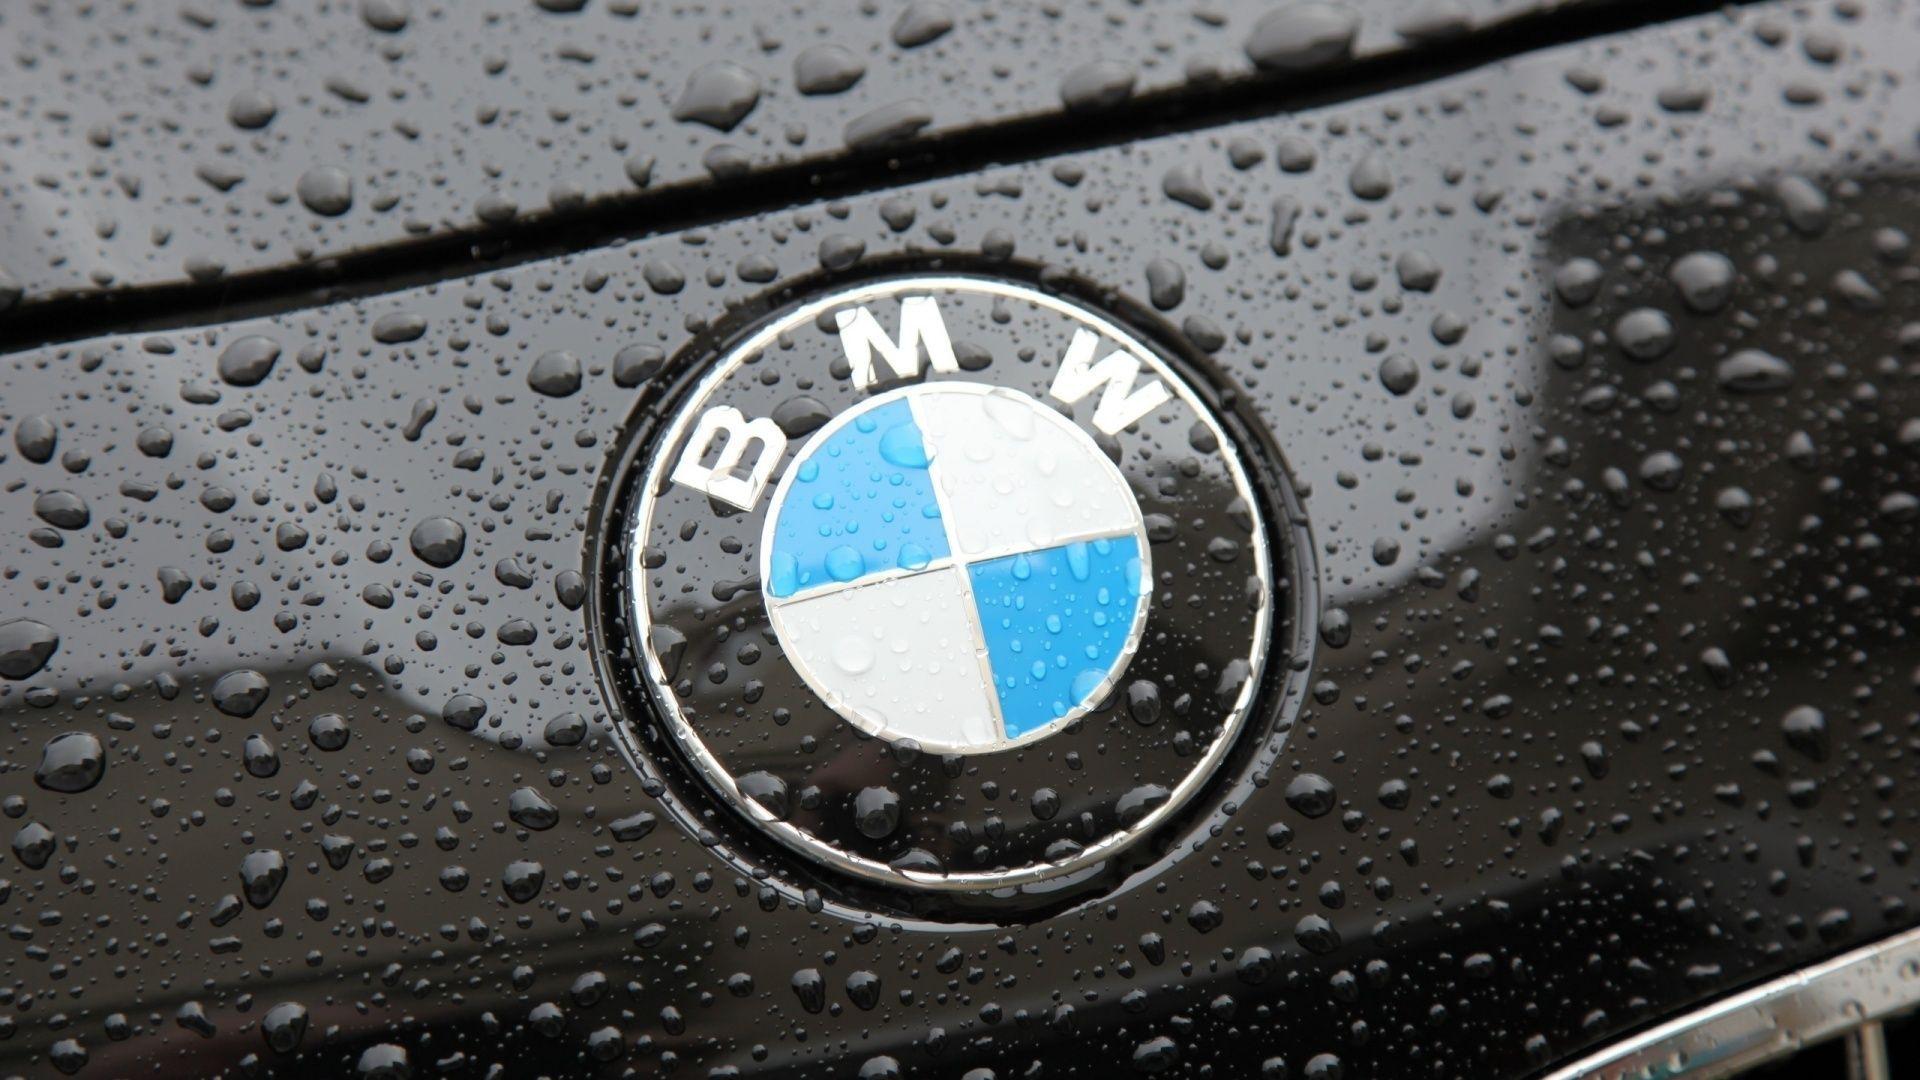 Bmw Logo Hd Wallpapers For Mobile - Infoupdate.org